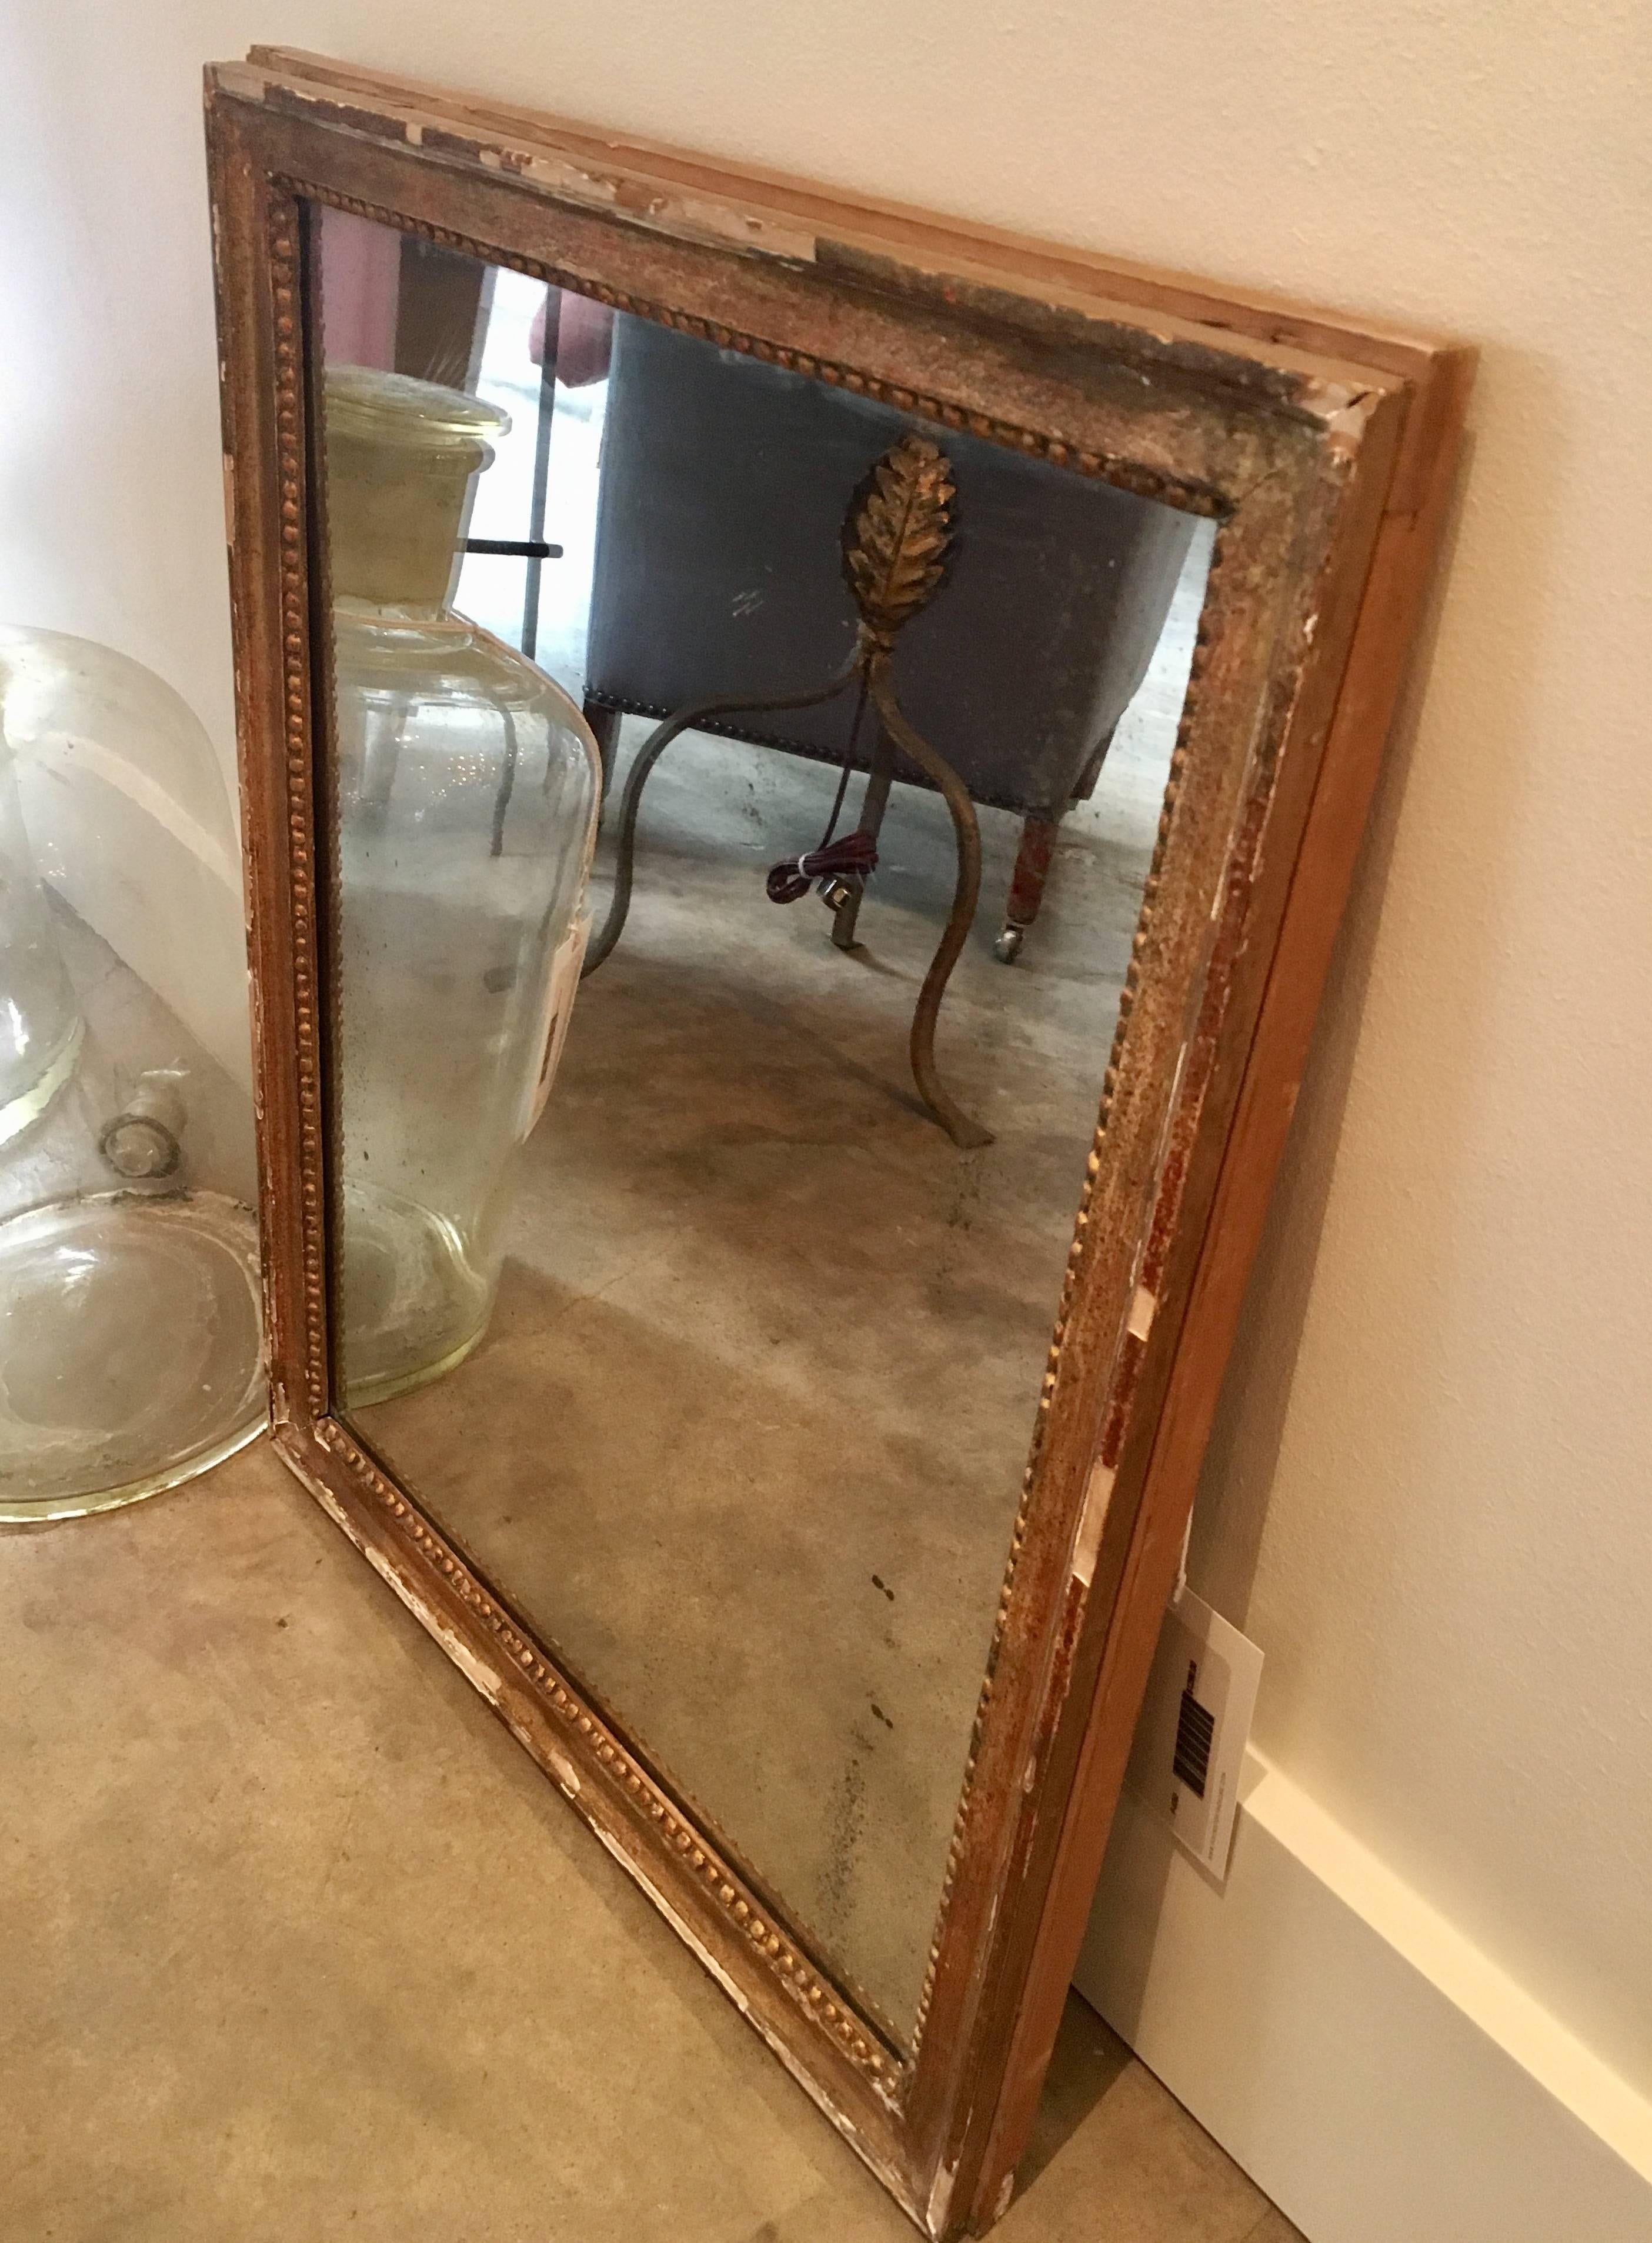 Petite 19th century mirror with giltwood bead frame, original plate. Dimensions: 20.5” W x 1.5” D x 26” H.